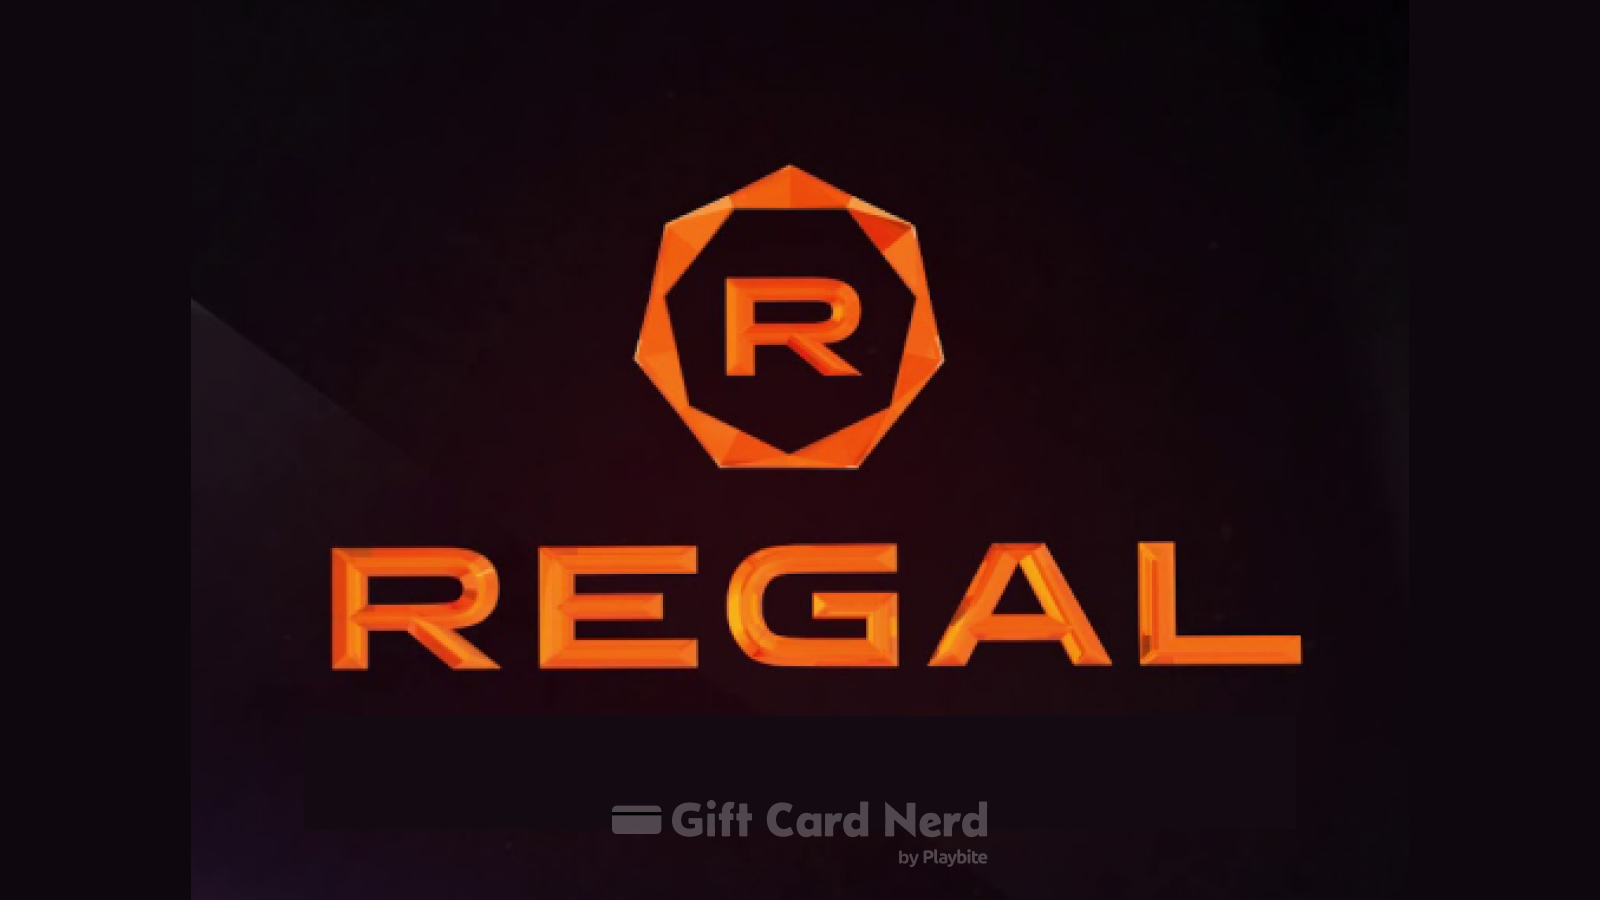 Can I Find Regal Gift Cards at Walgreens?